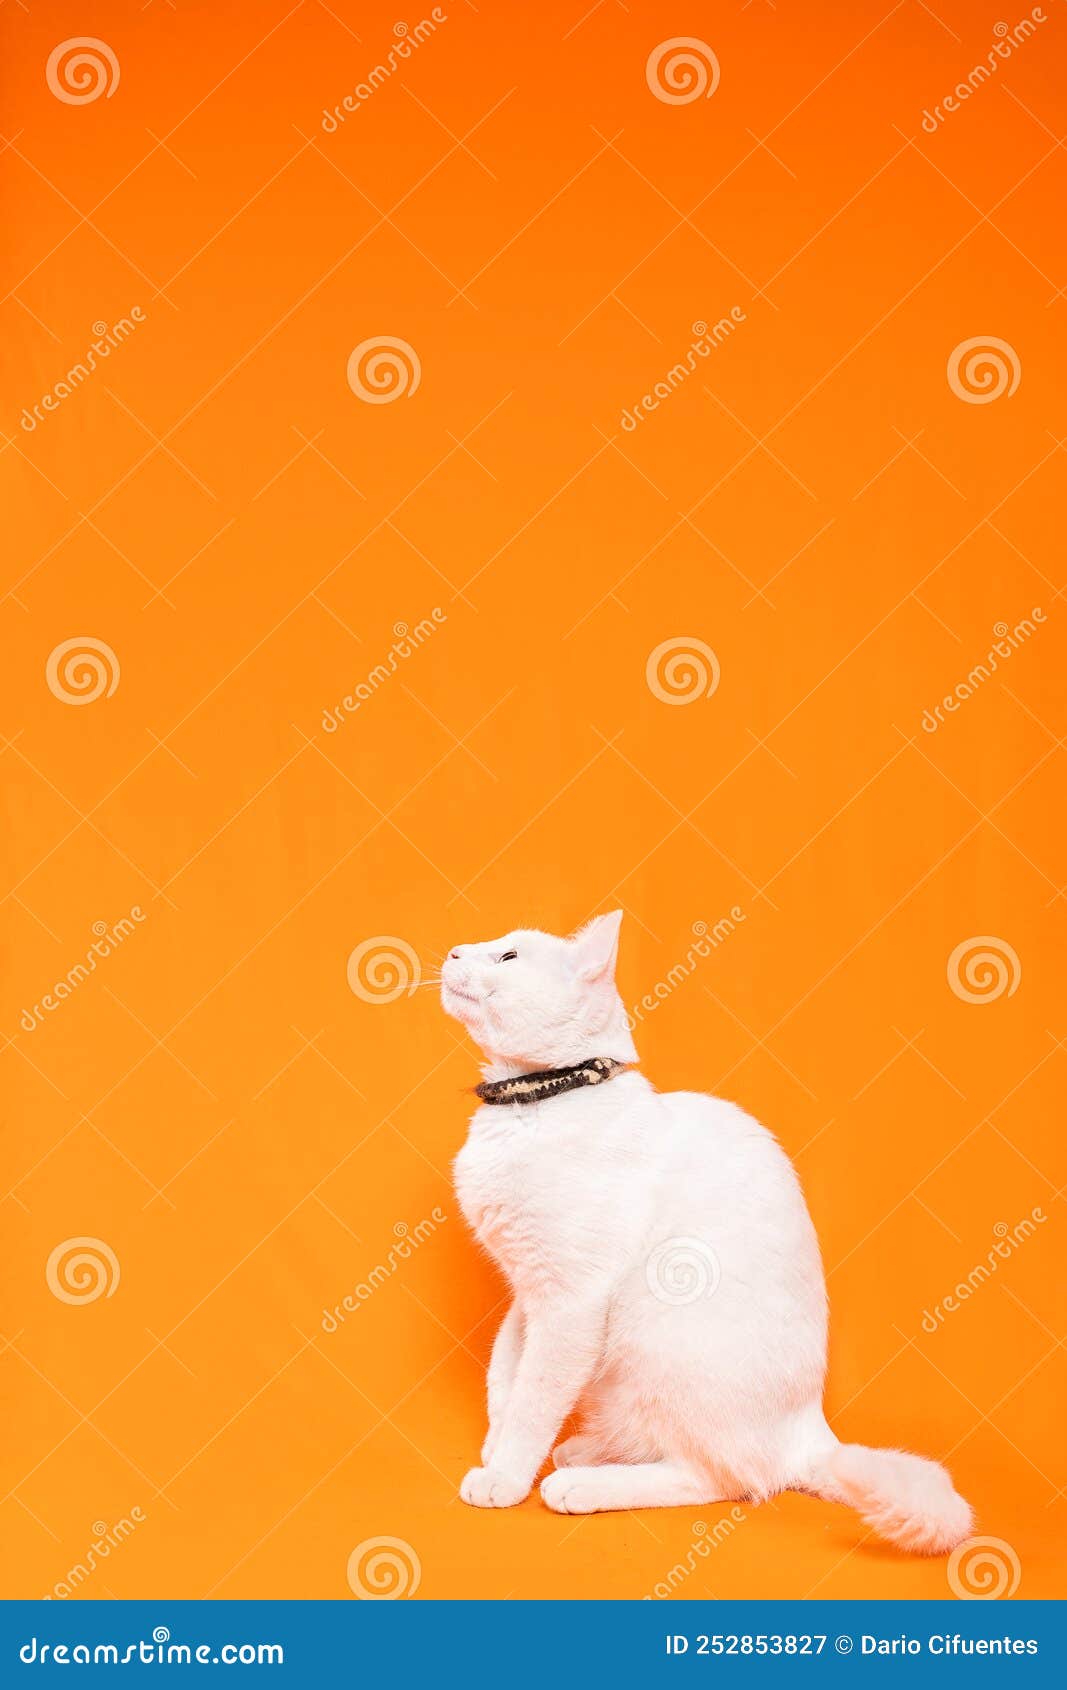 young white cat on orange background, space for text